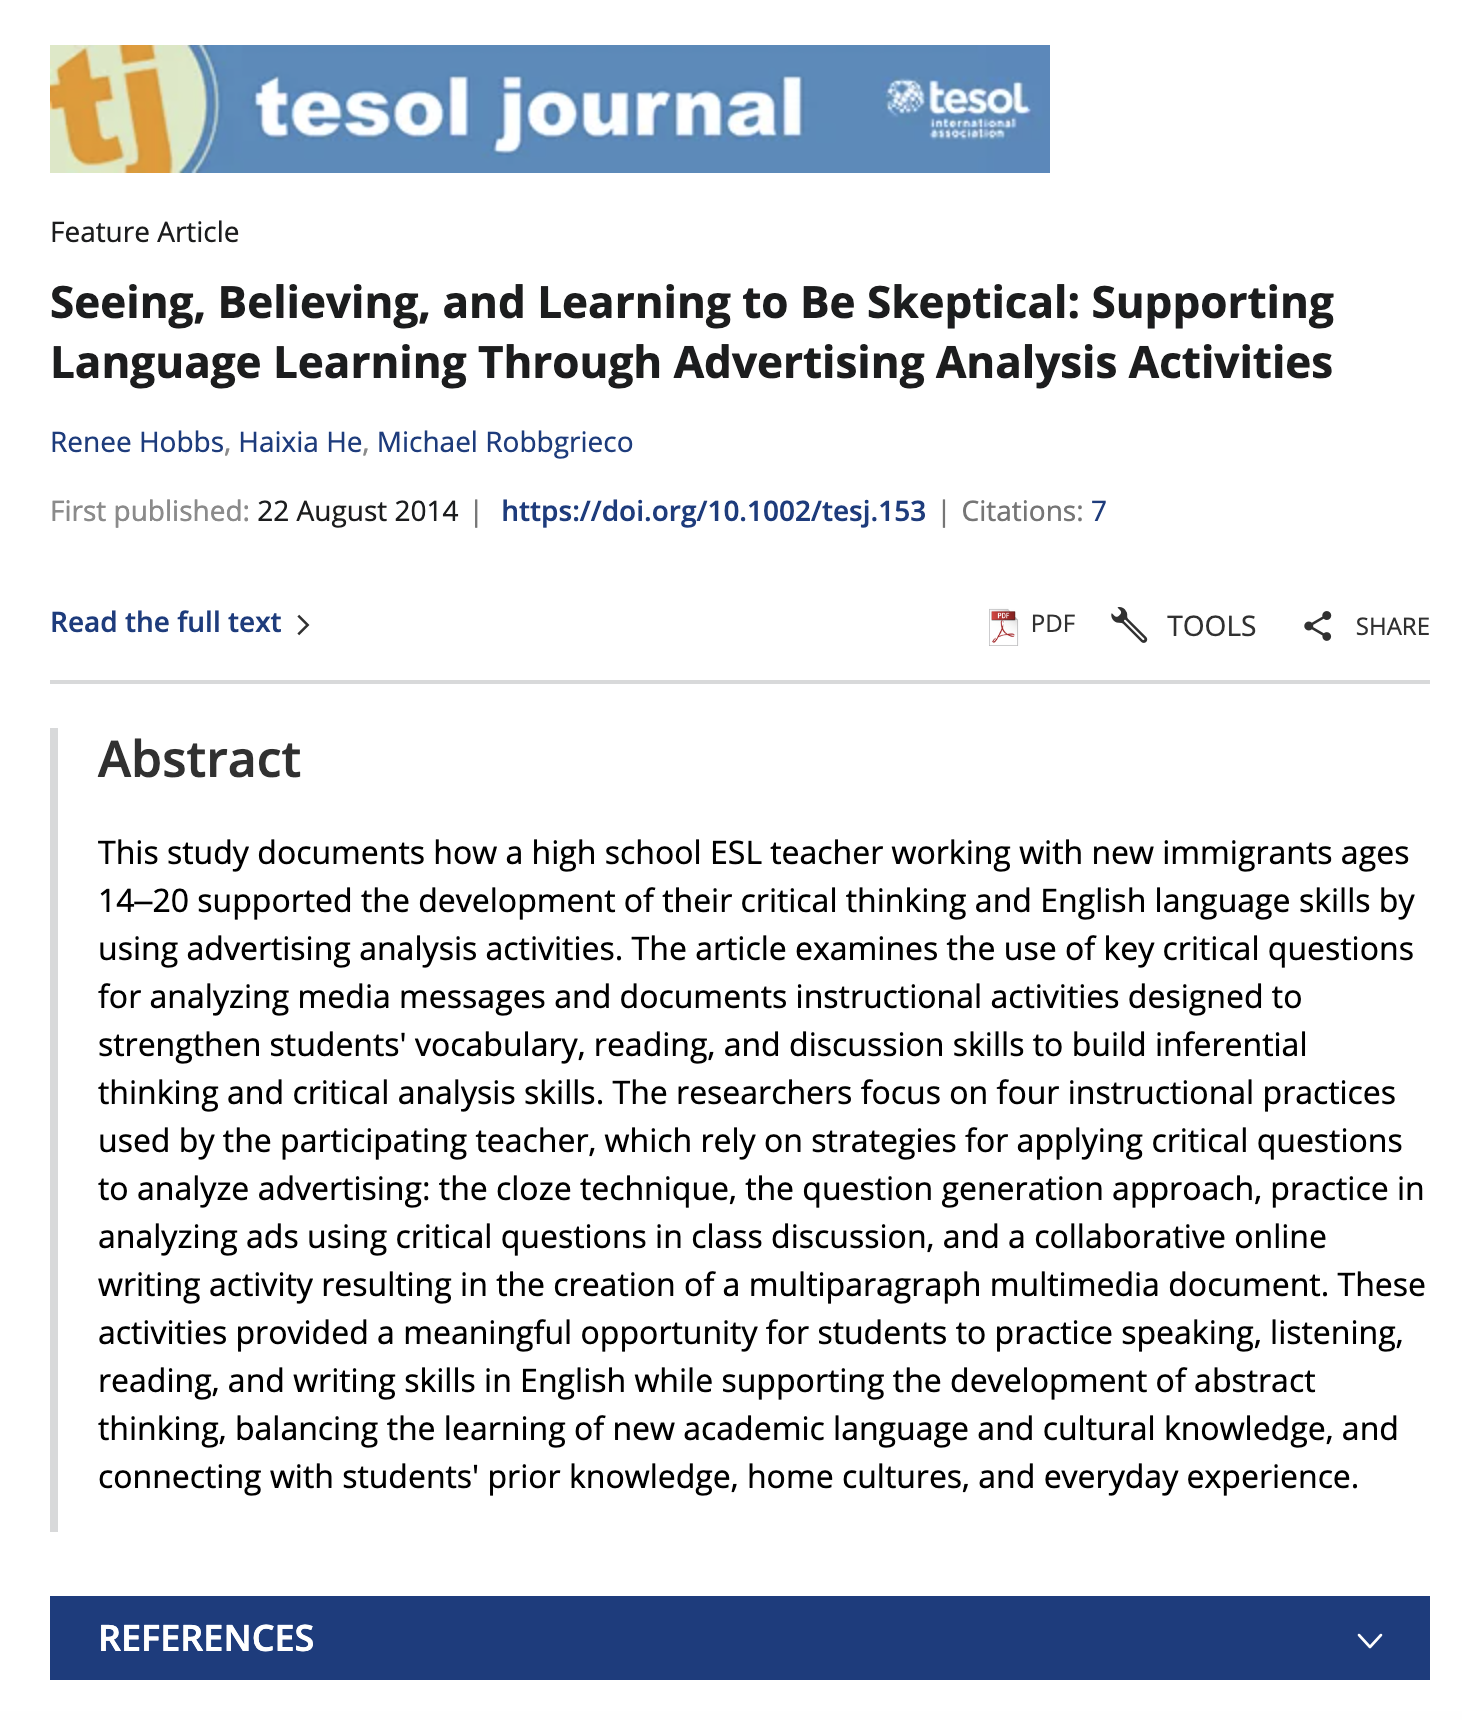 Seeing, Believing and Learning to be Skeptical: Supporting Language Learning Through Advertising Analysis Activities